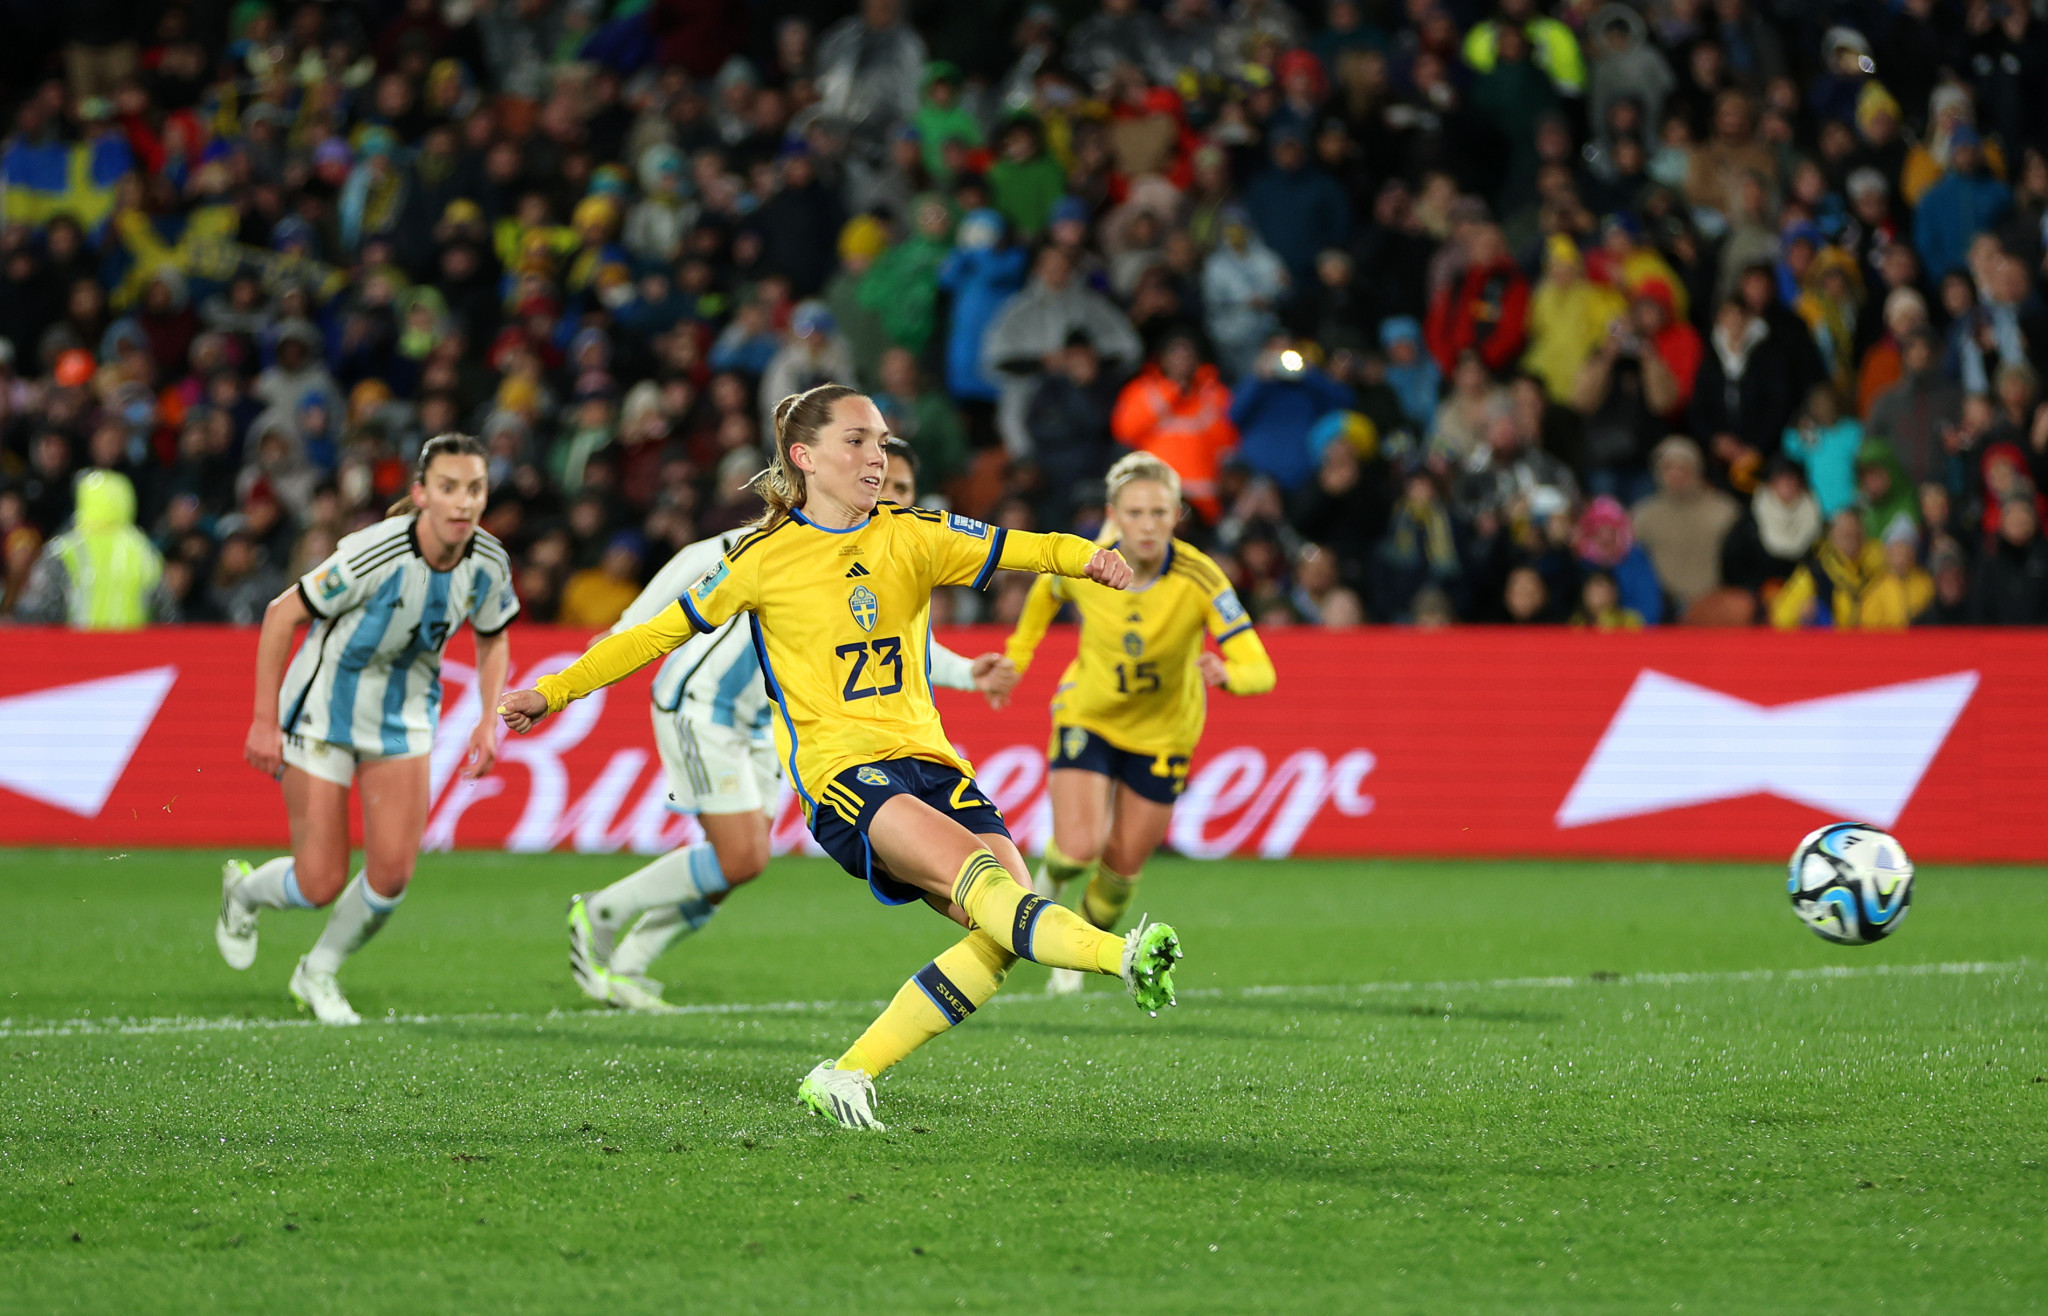 Elin Rubensson's late penalty sealed a 2-0 win for Sweden over Argentina ©Getty Images